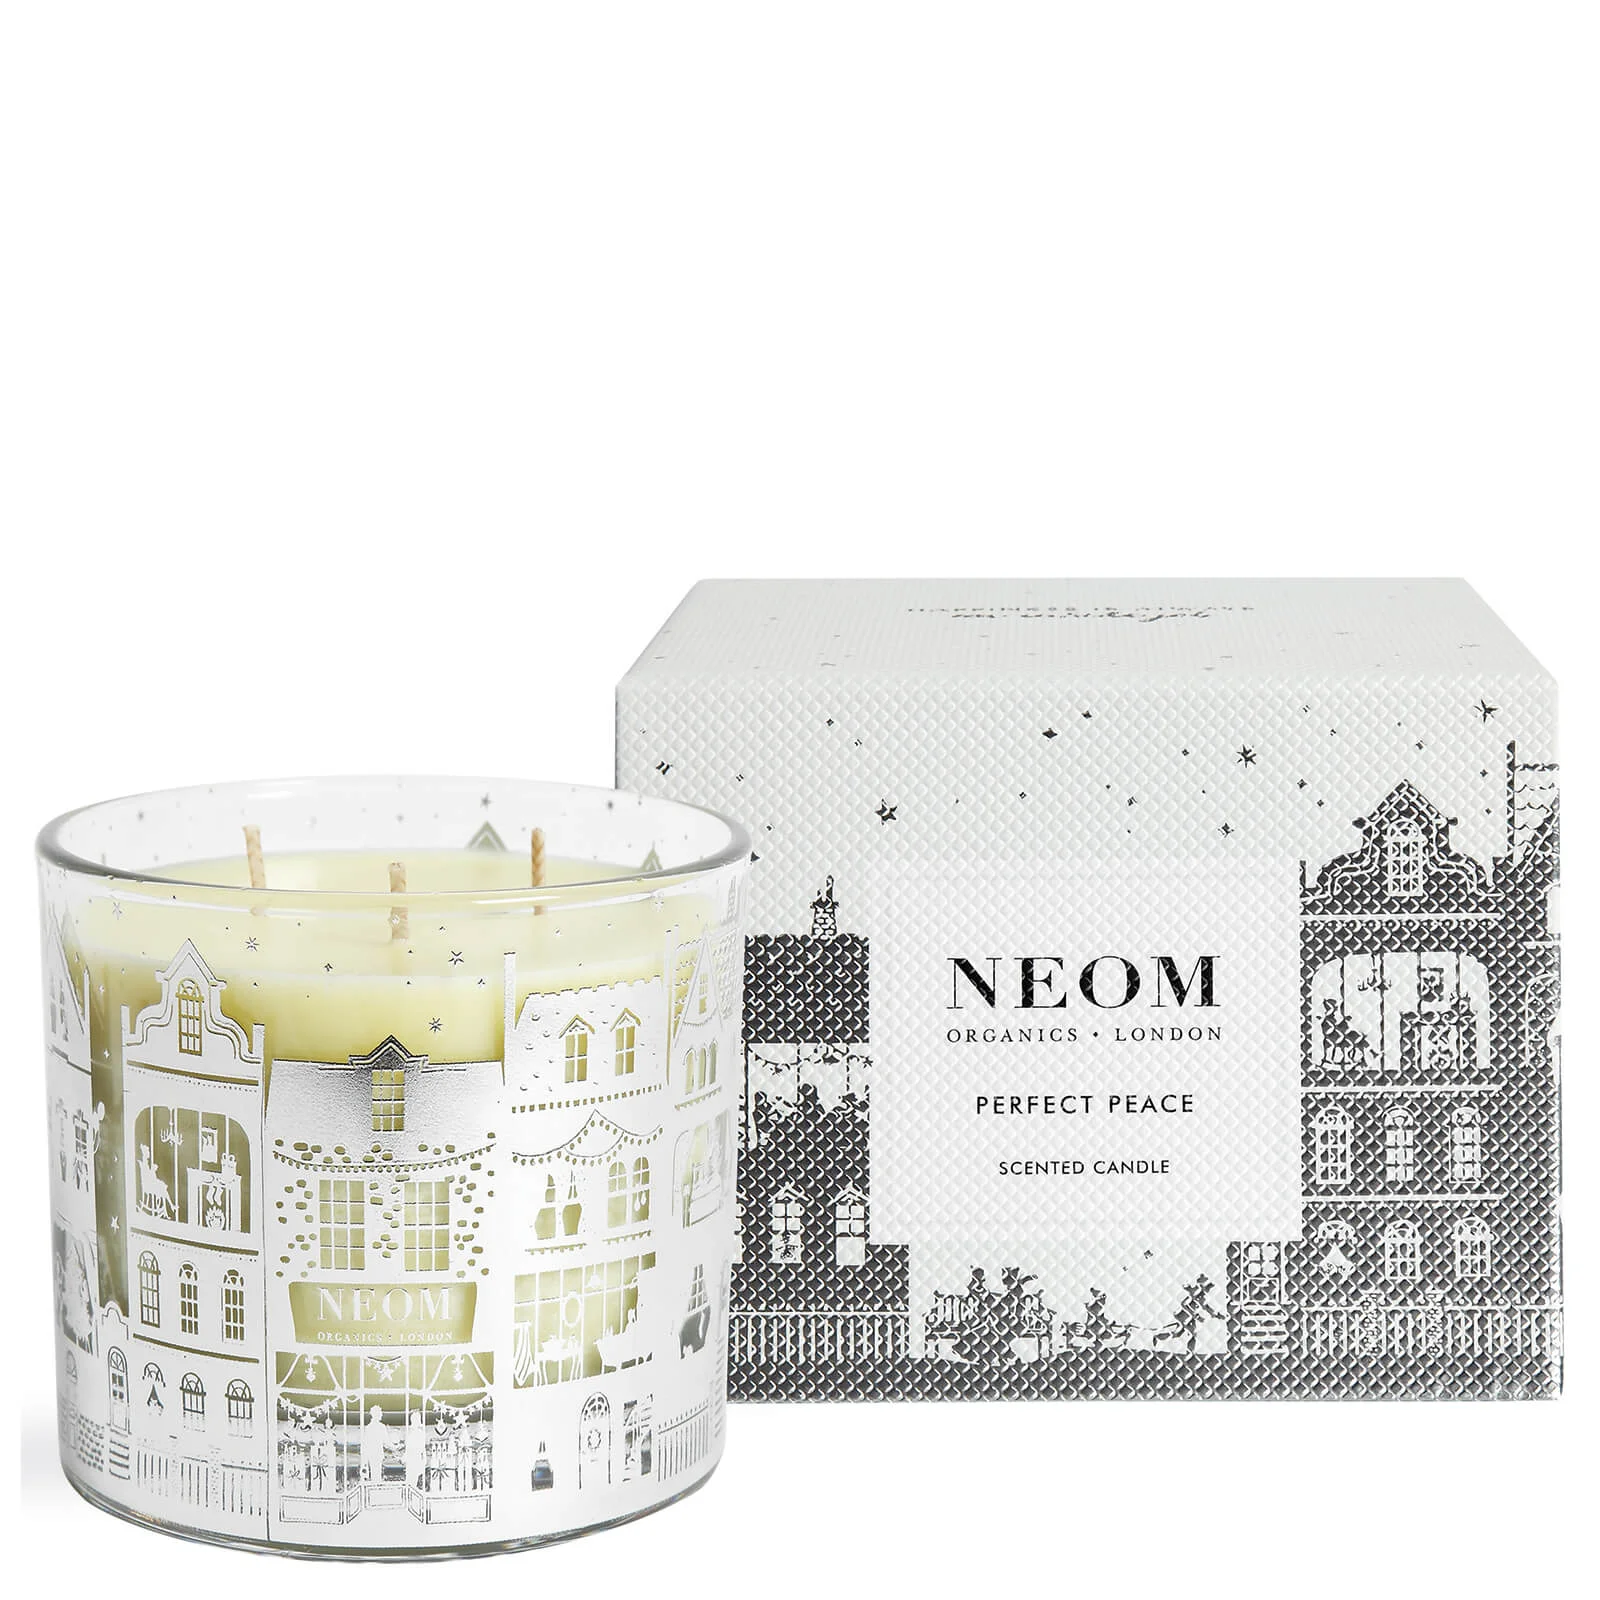 Neom Organics London Perfect Peace Scented Candle (3 Wicks) Image 1